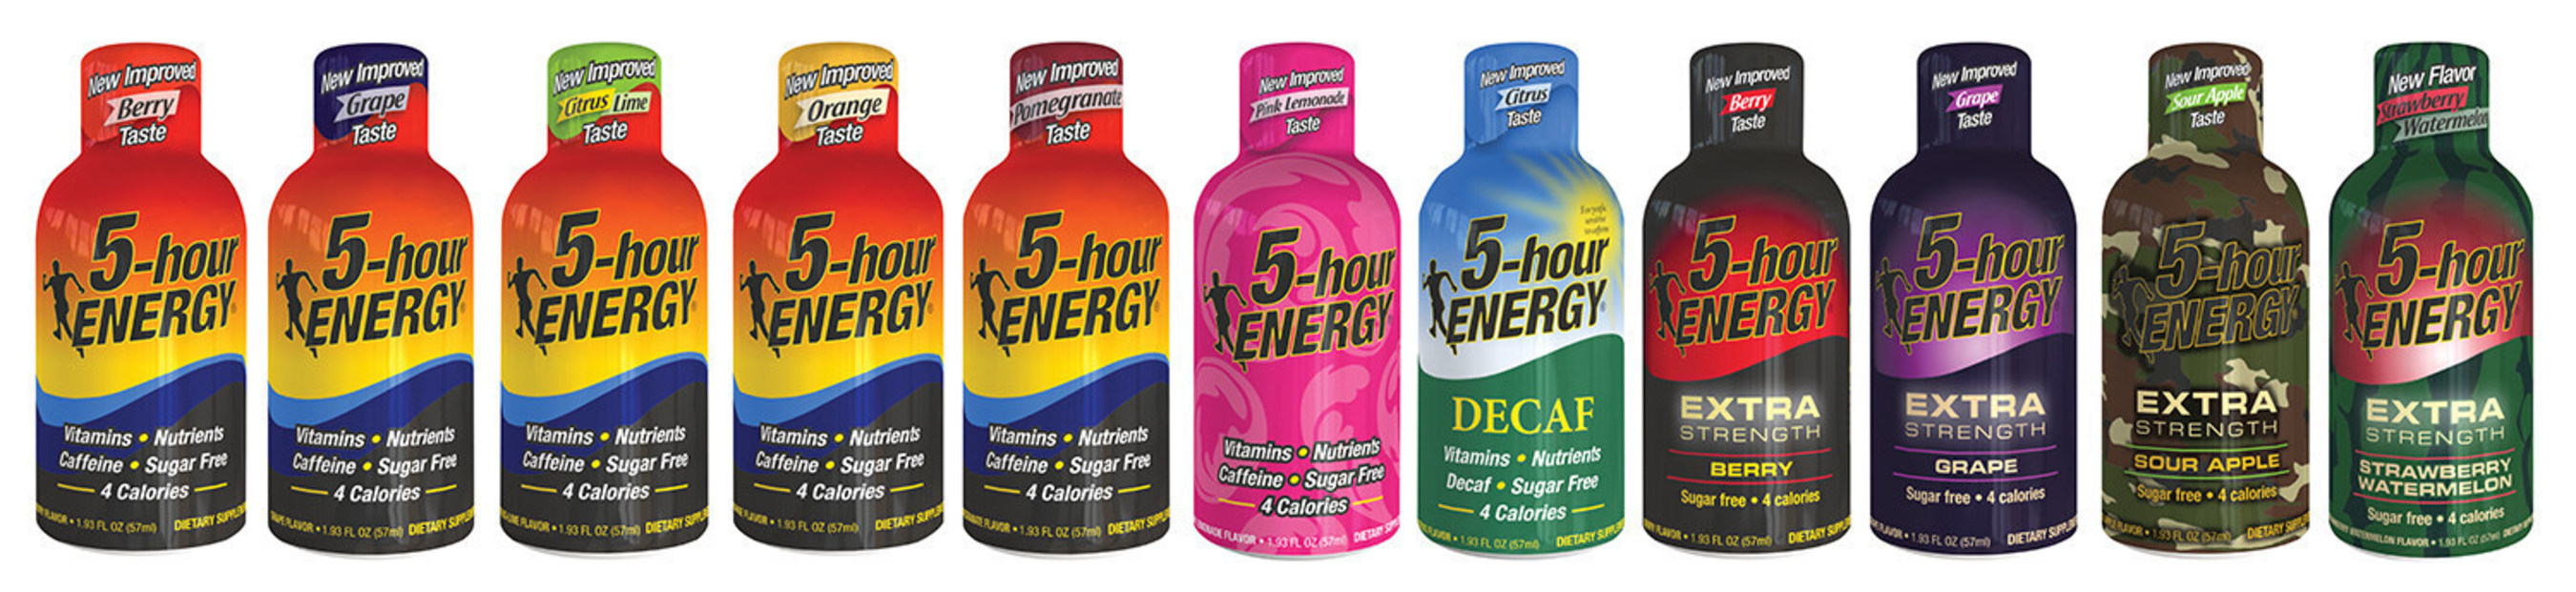 5-hour ENERGY's new and improved taste shots are now available nationwide.